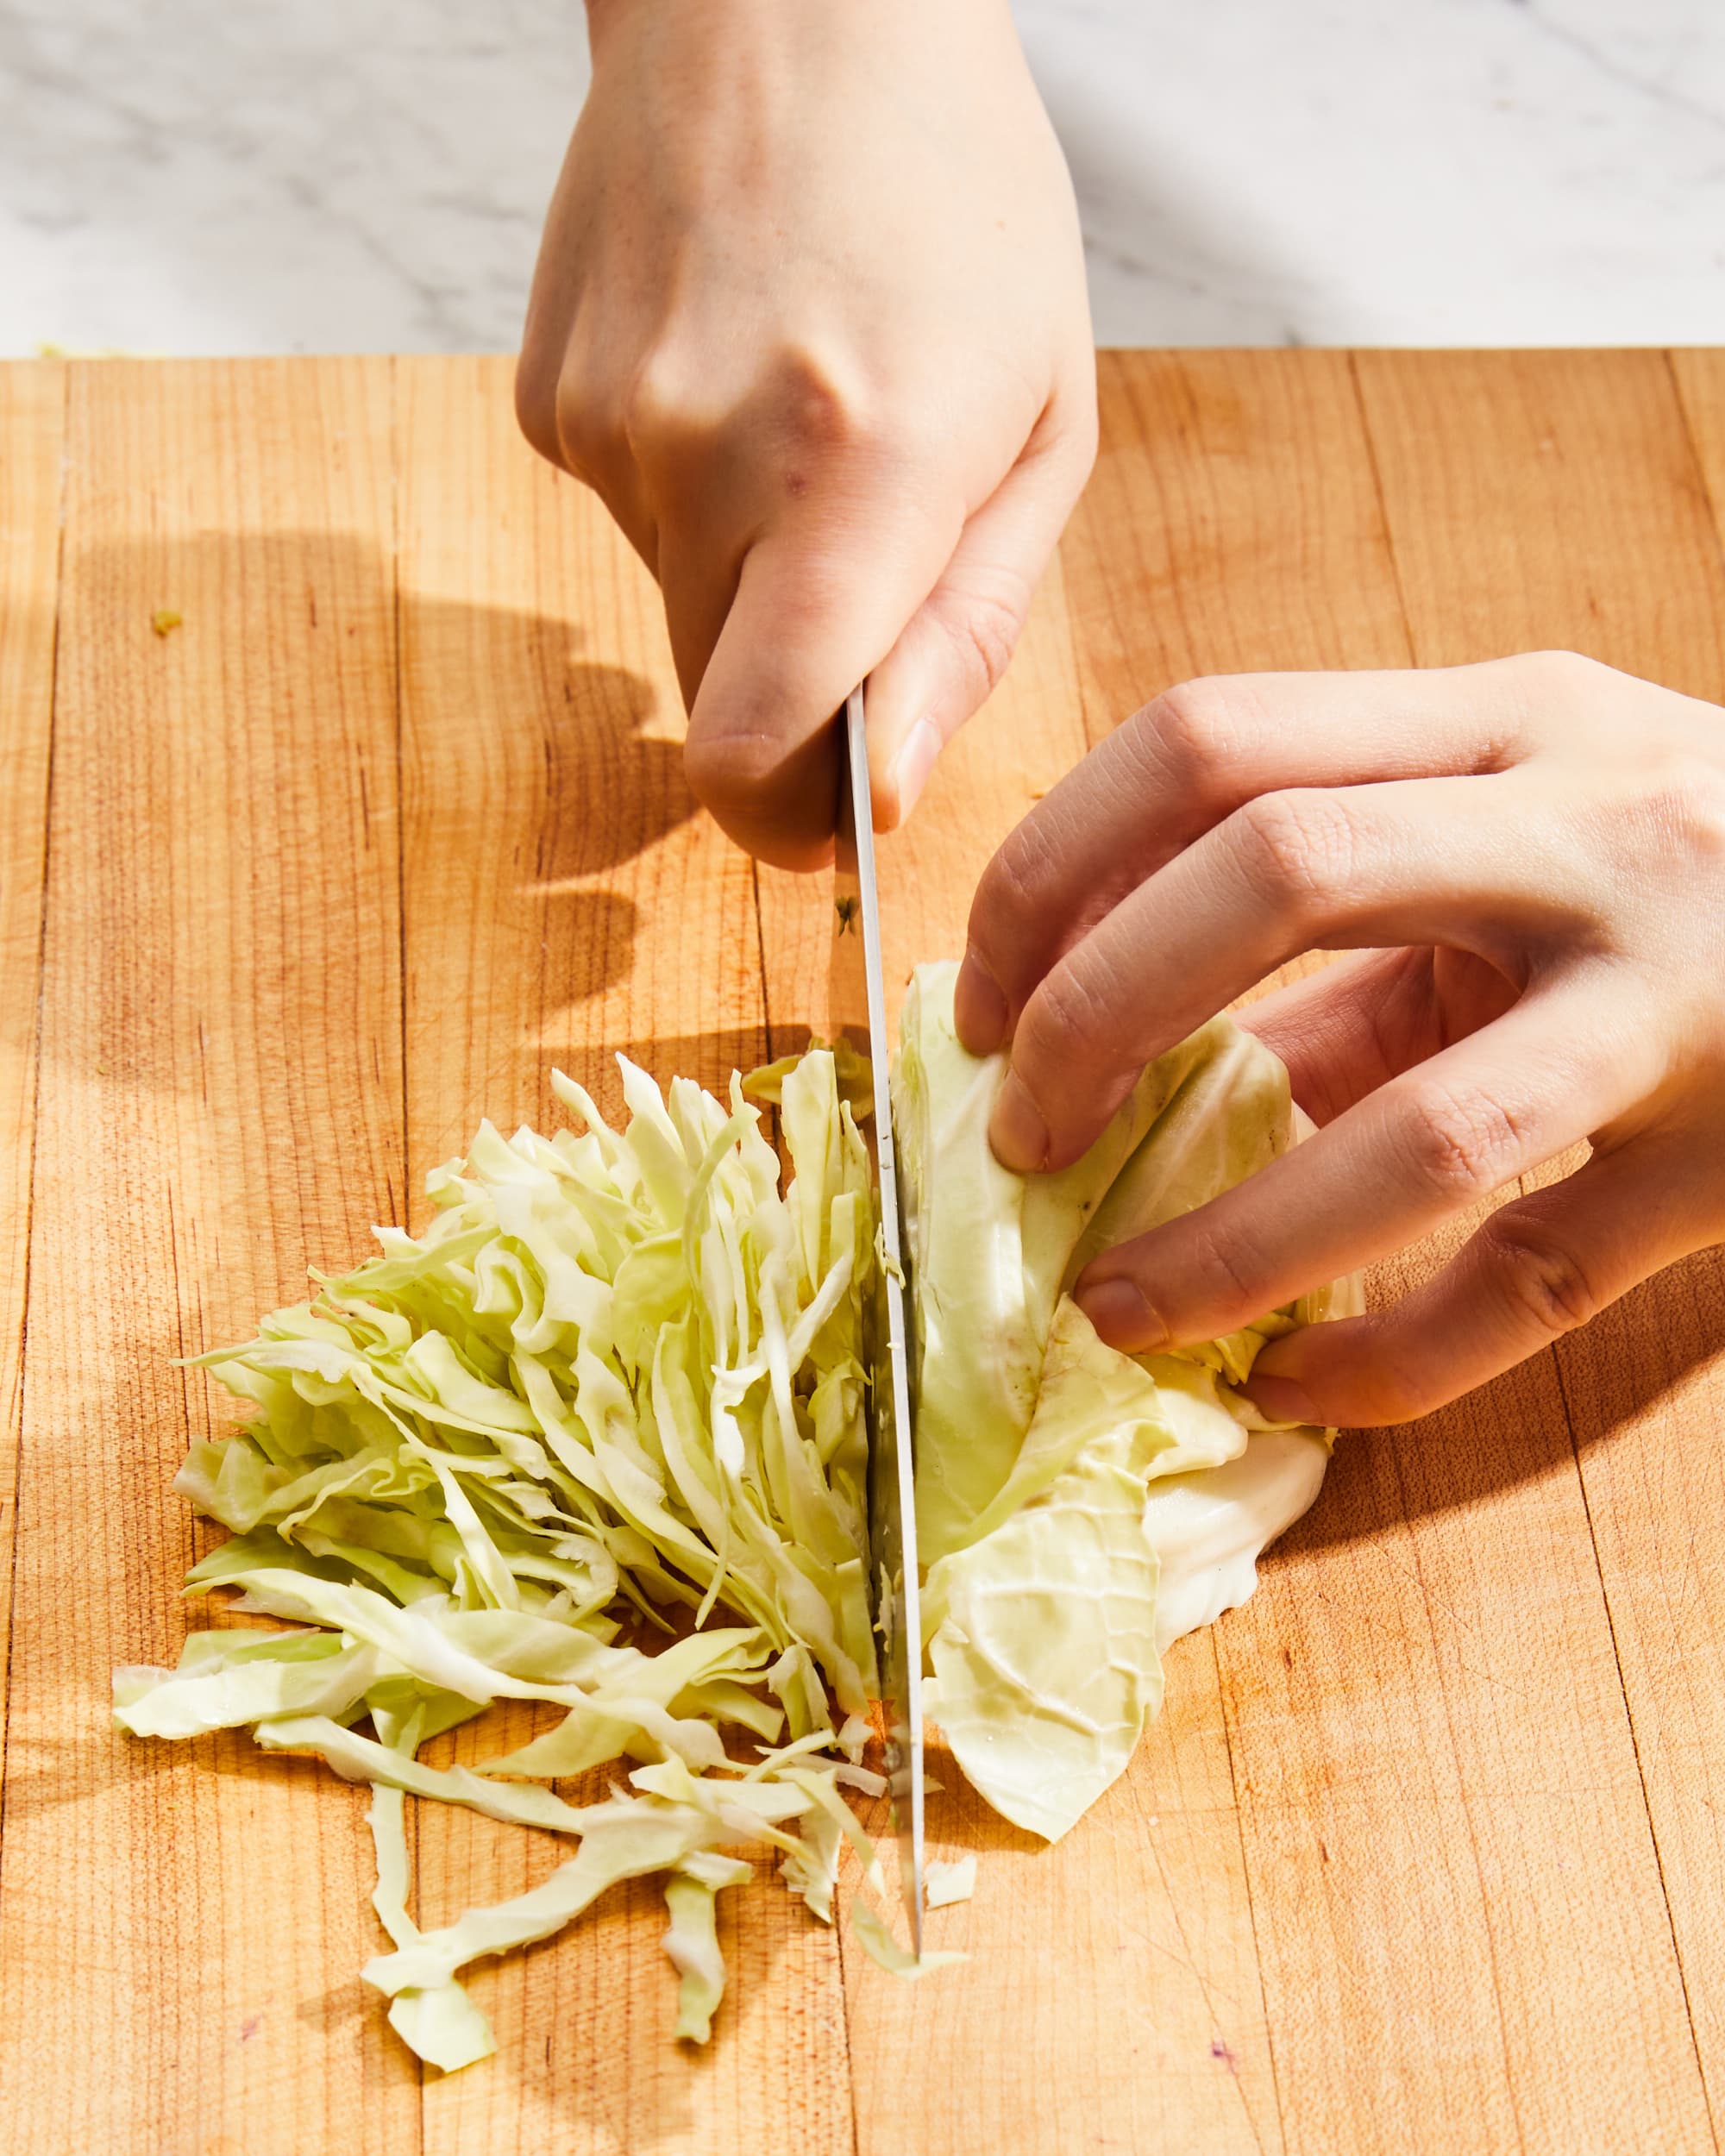 https://cdn.apartmenttherapy.info/image/upload/v1671732536/k/Photo/Tips/2023-02-How-to-Cut-Cabbage/How-to-cut-cabbage-250.jpg